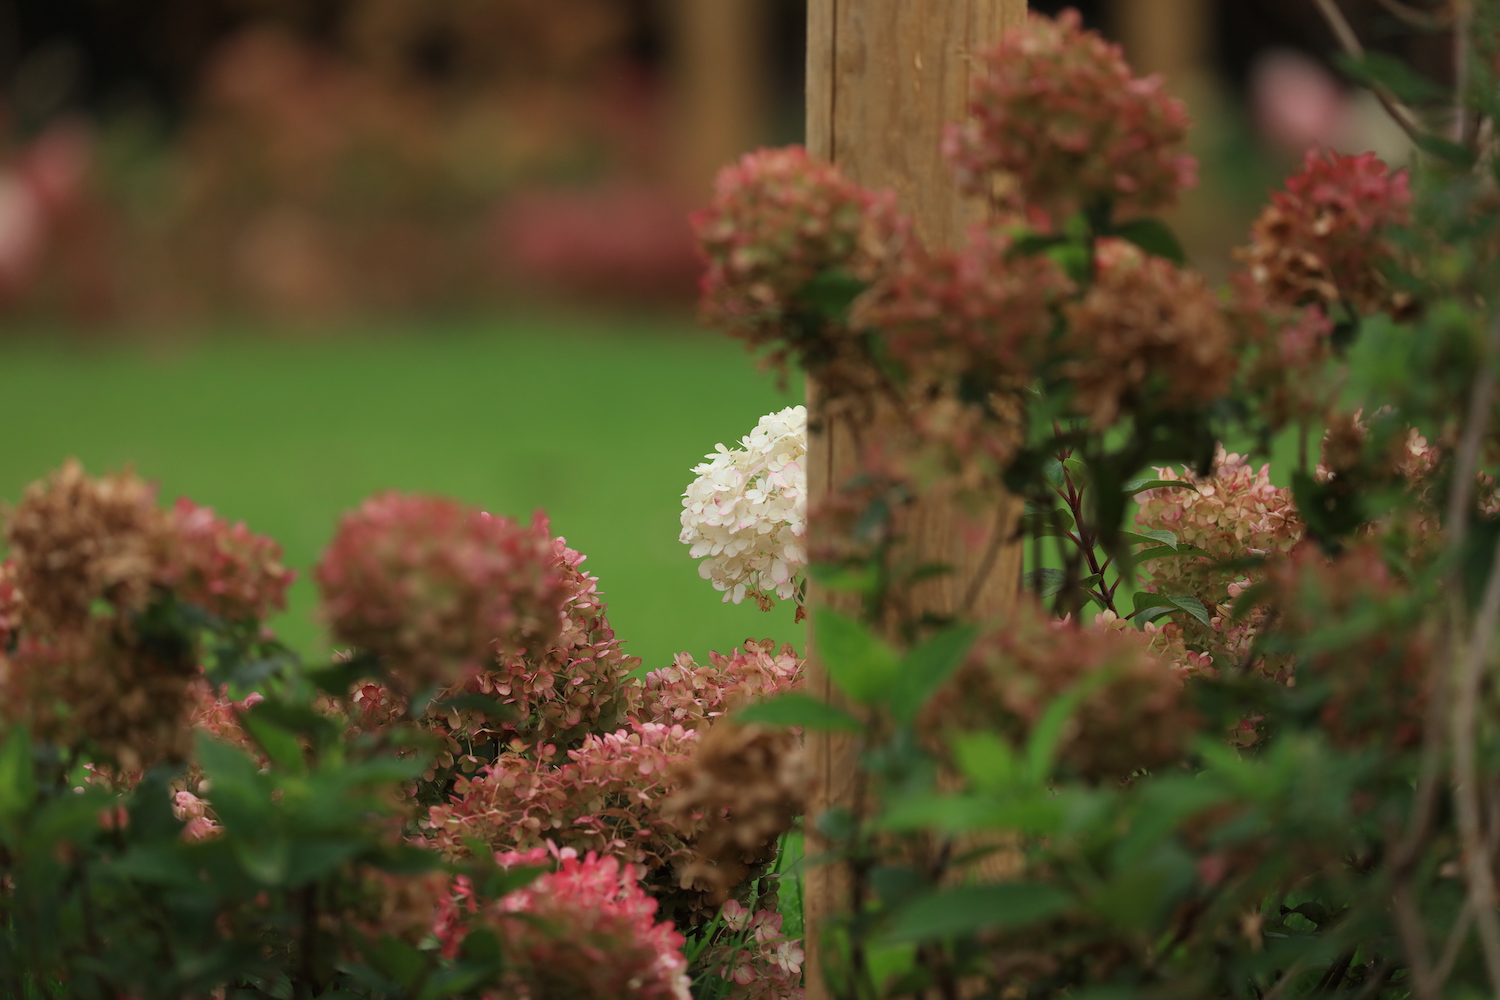 Hydrangeas turning pinks and rusts in Autumn